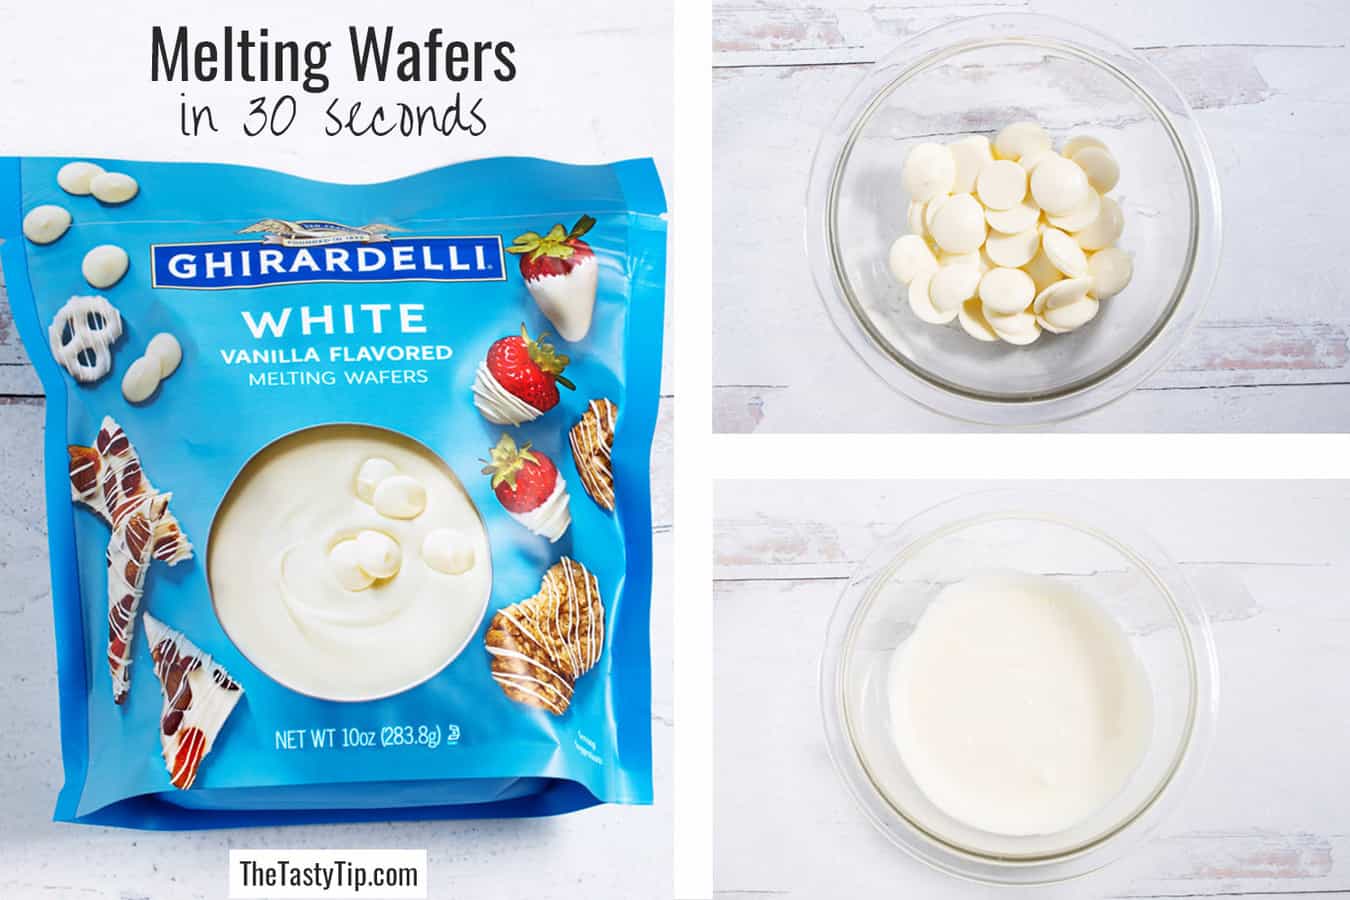 Melting wafers in package, bowl, and melted.